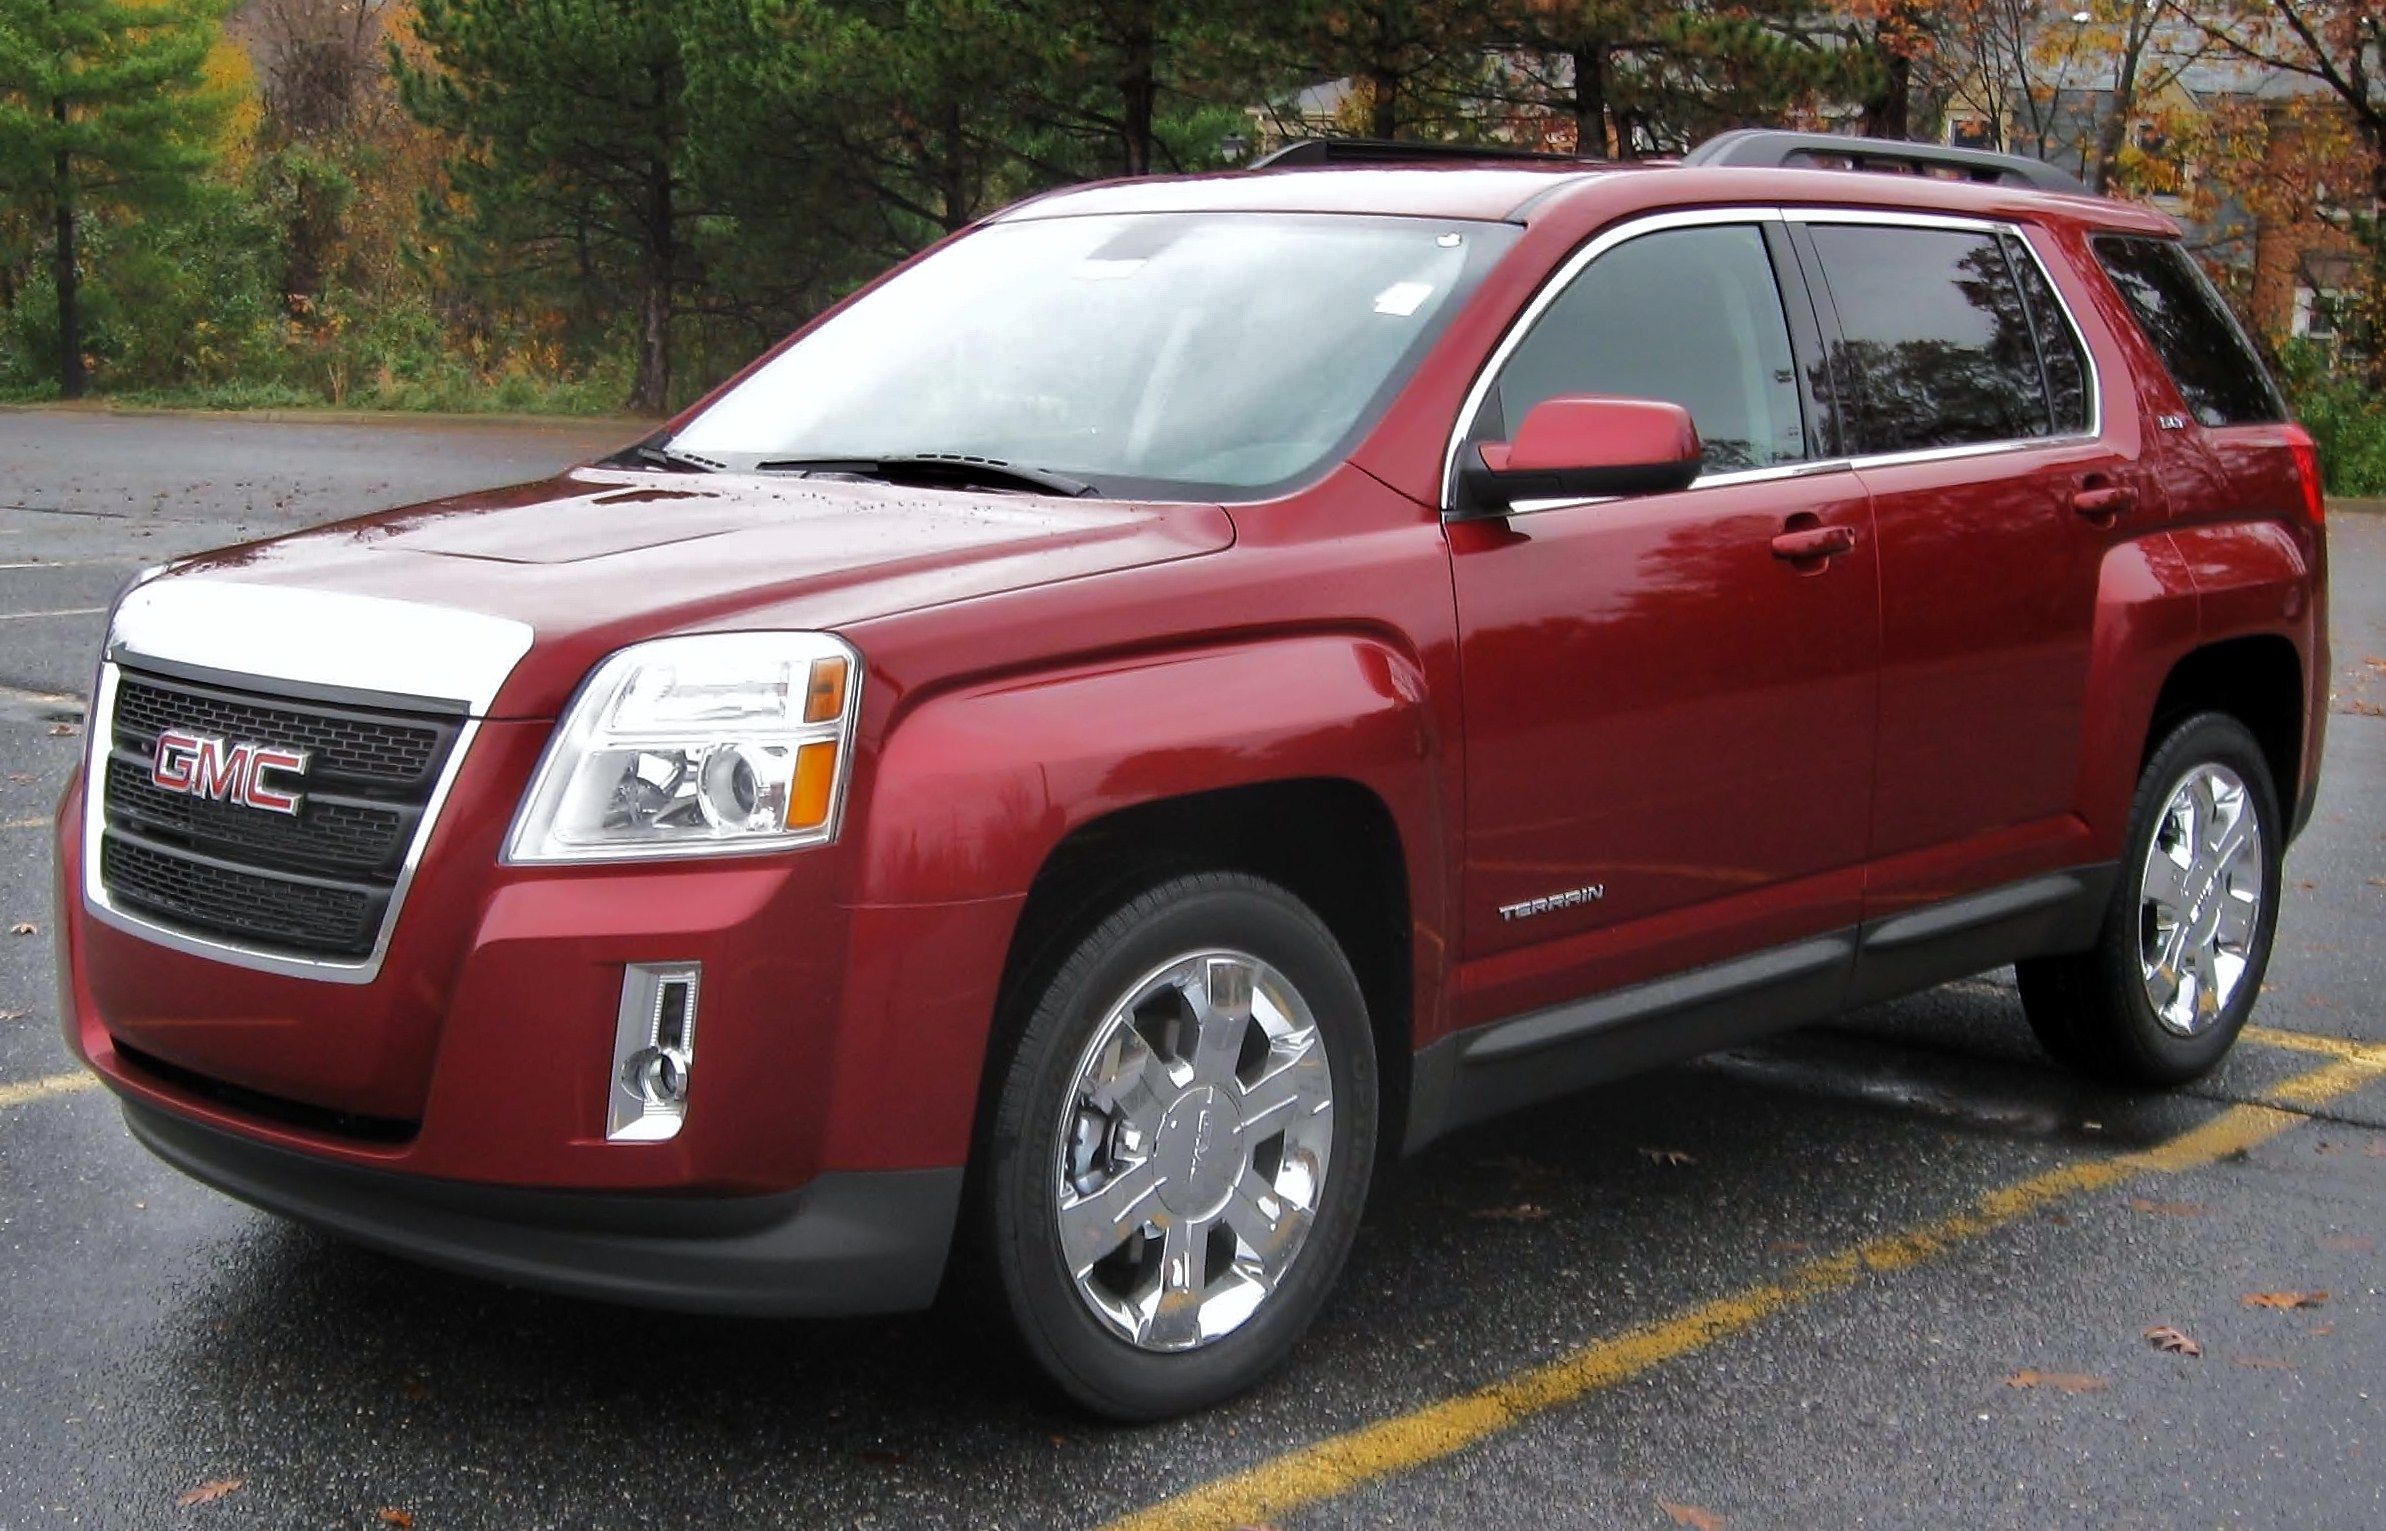 Here's What The 2010 GMC Terrain Costs